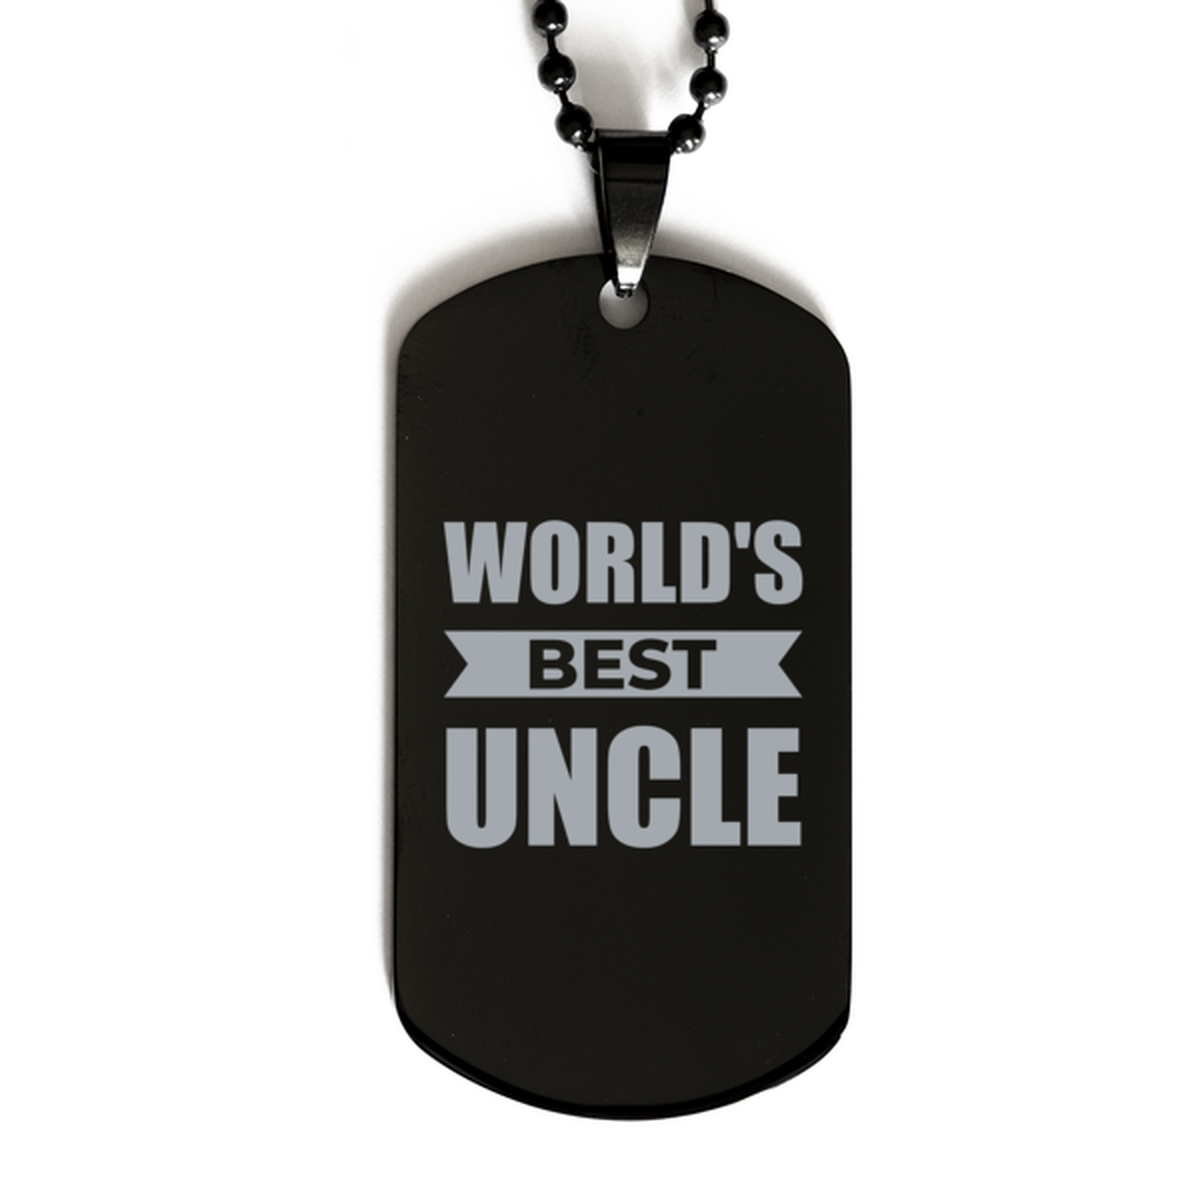 Worlds Best Uncle Gifts, Funny Black Engraved Dog Tag For Uncle, Birthday Presents For Men